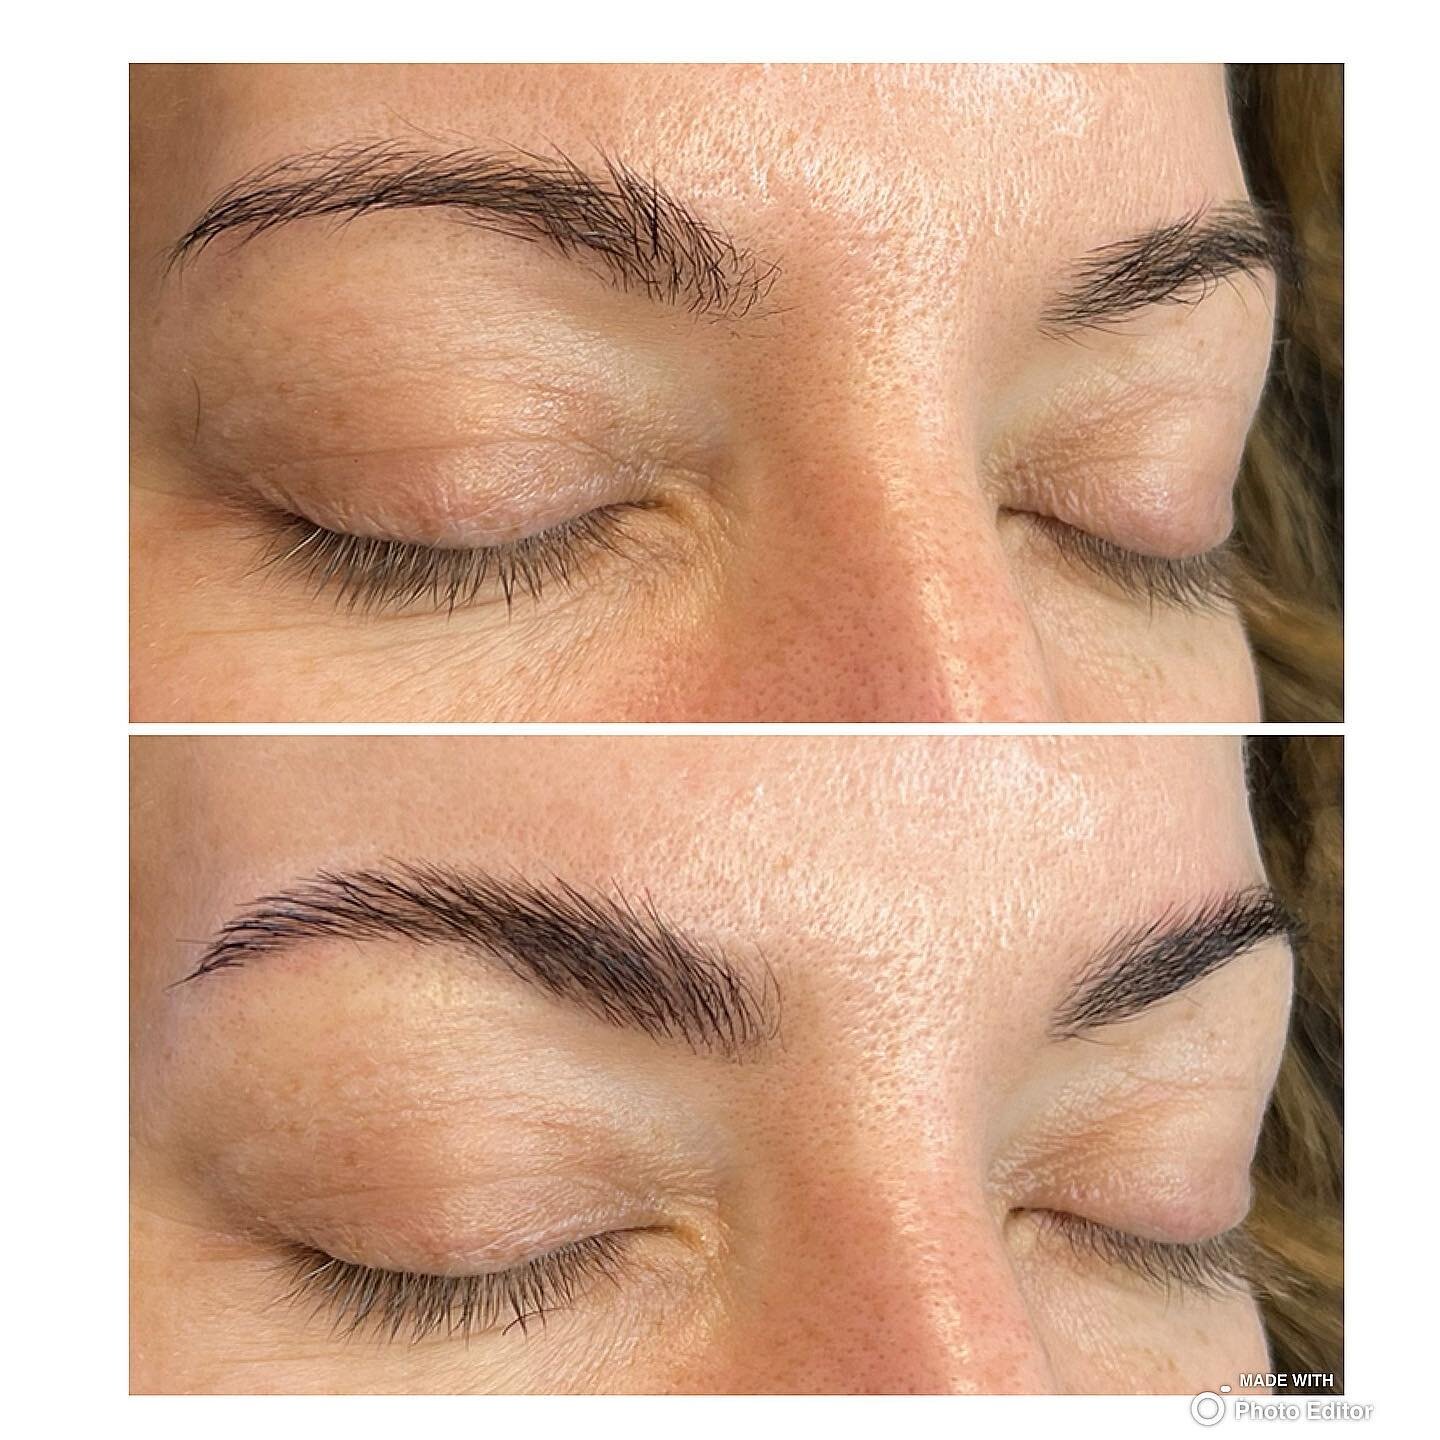 Before and after Brow Lamination for my bestie!💕 
You can see how the lamination and tint combo helps make them look more lifted, shaped, and full? 
What a difference! 😍🙌🏼

Come back every 6-8 weeks to maintain this look. ☺️